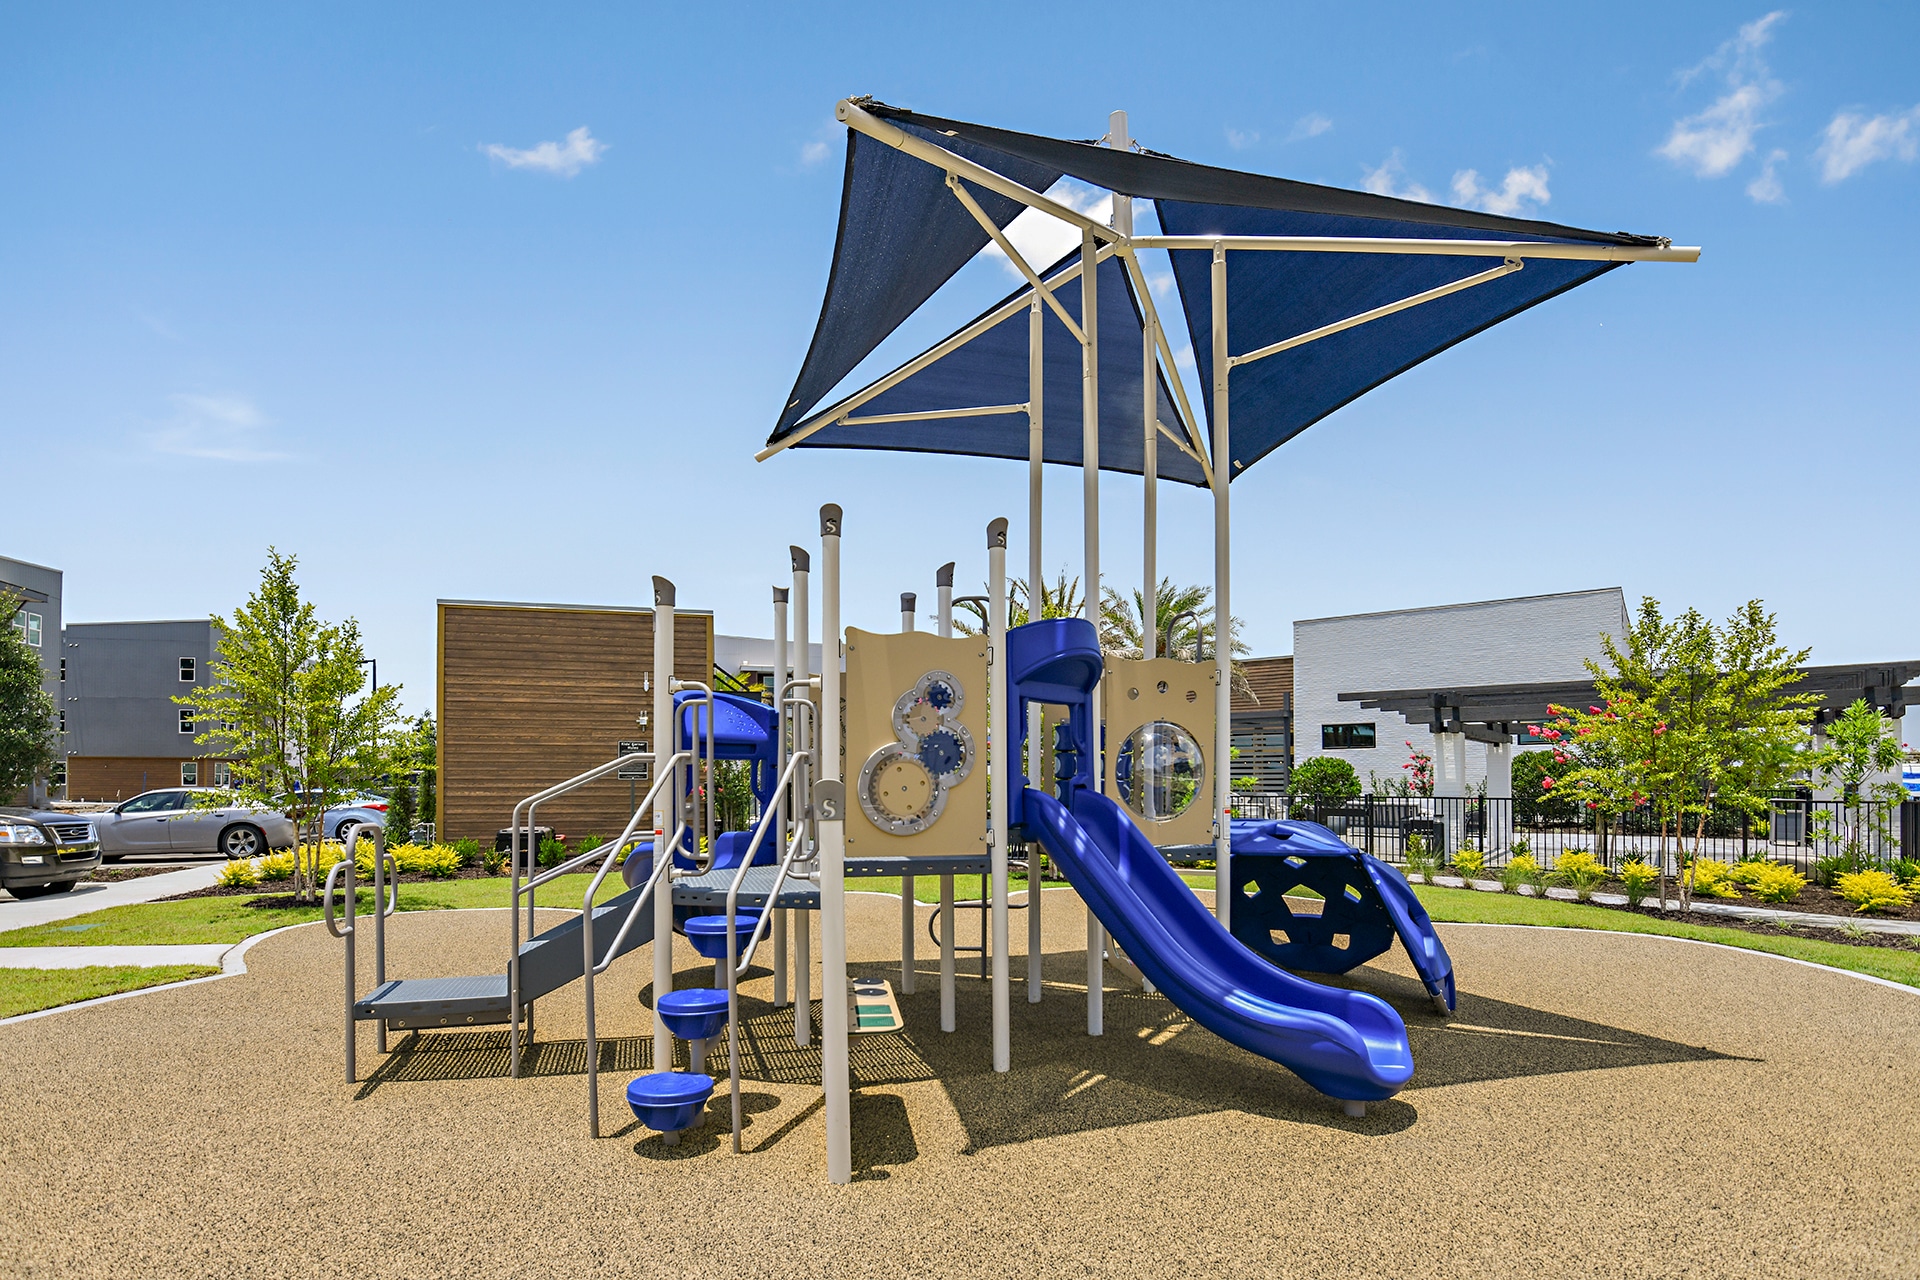 A playground with a blue slide.